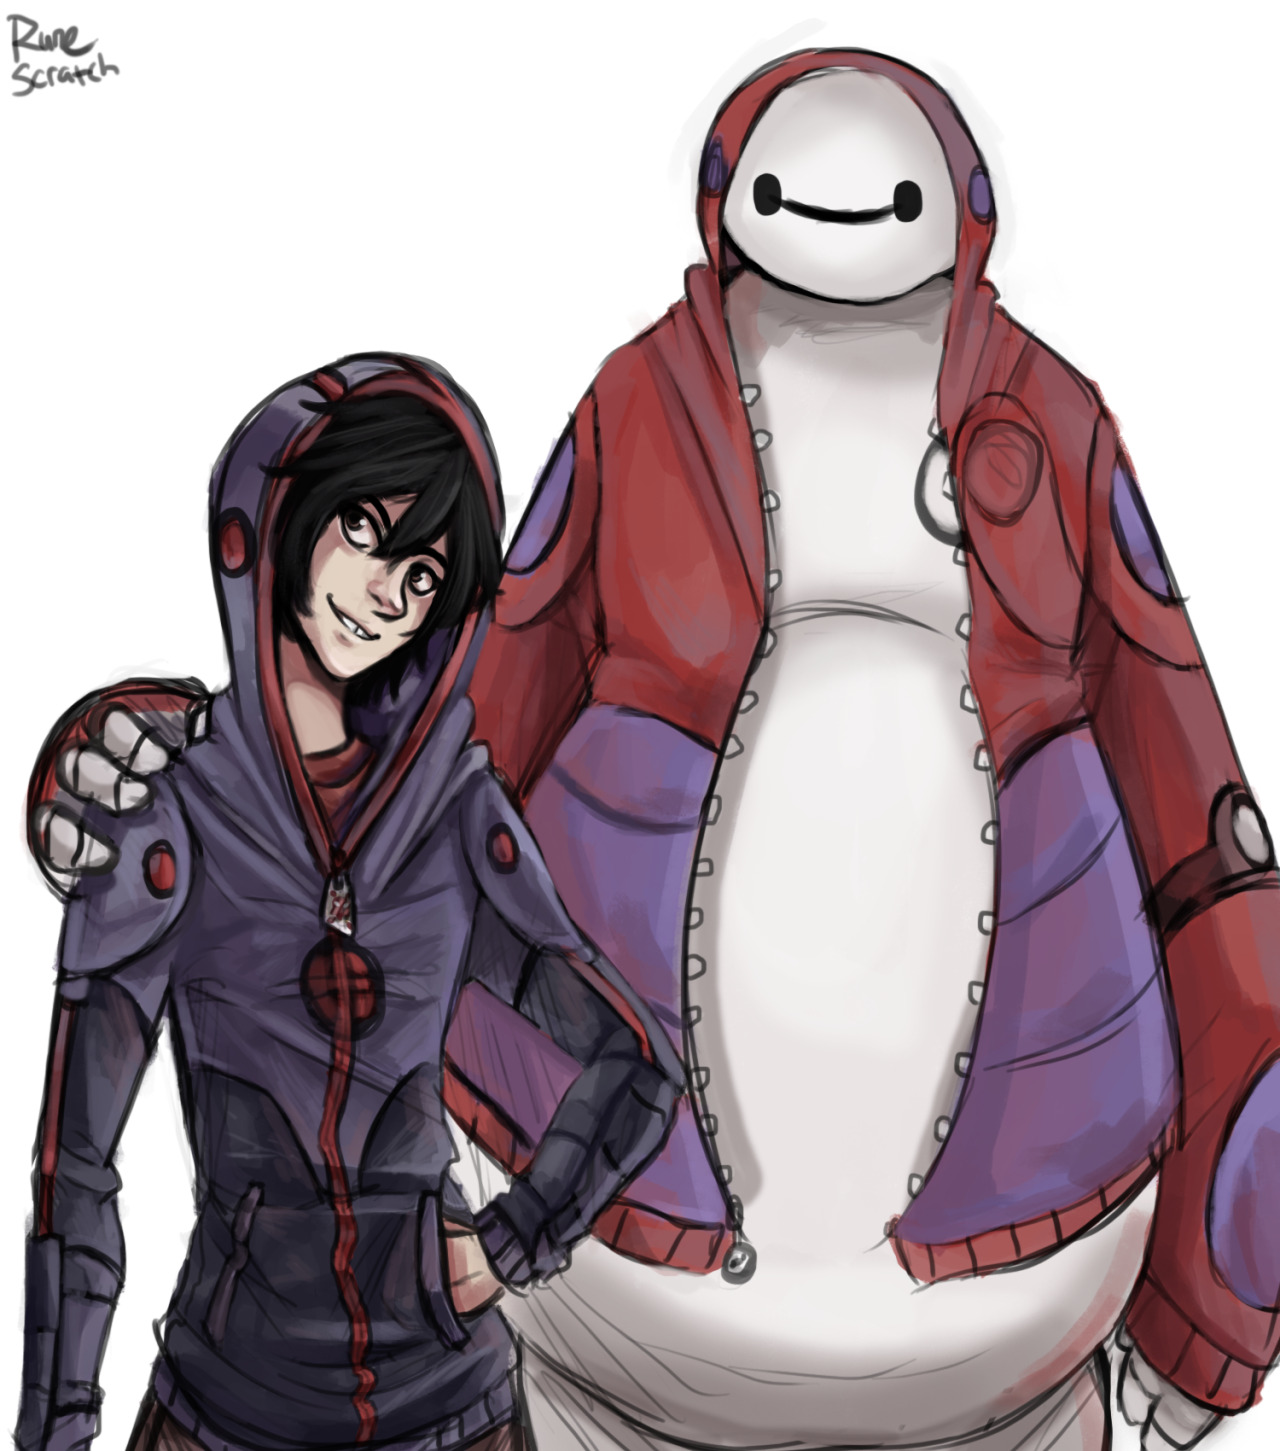 runescratch:  b1ueflame gave me the idea of the Big Hero 6 cast in hoodies based